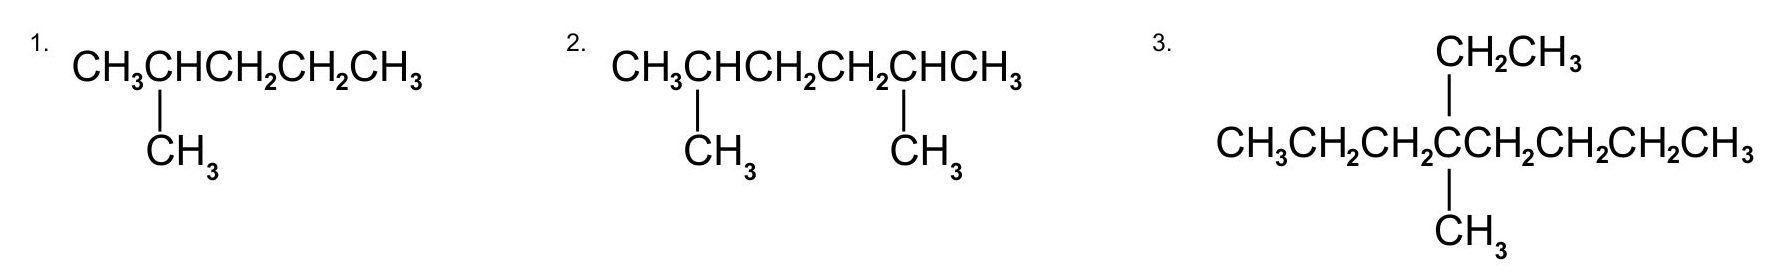 There are 3 chemical structures. From left to right: A 5 carbon chain with a methyl group at the 2nd carbon; a 6 carbon chain with a methyl group at the 2nd and 4th carbon; and a 8 carbon chain with a ethyl and a methyl at the 4th carbon.